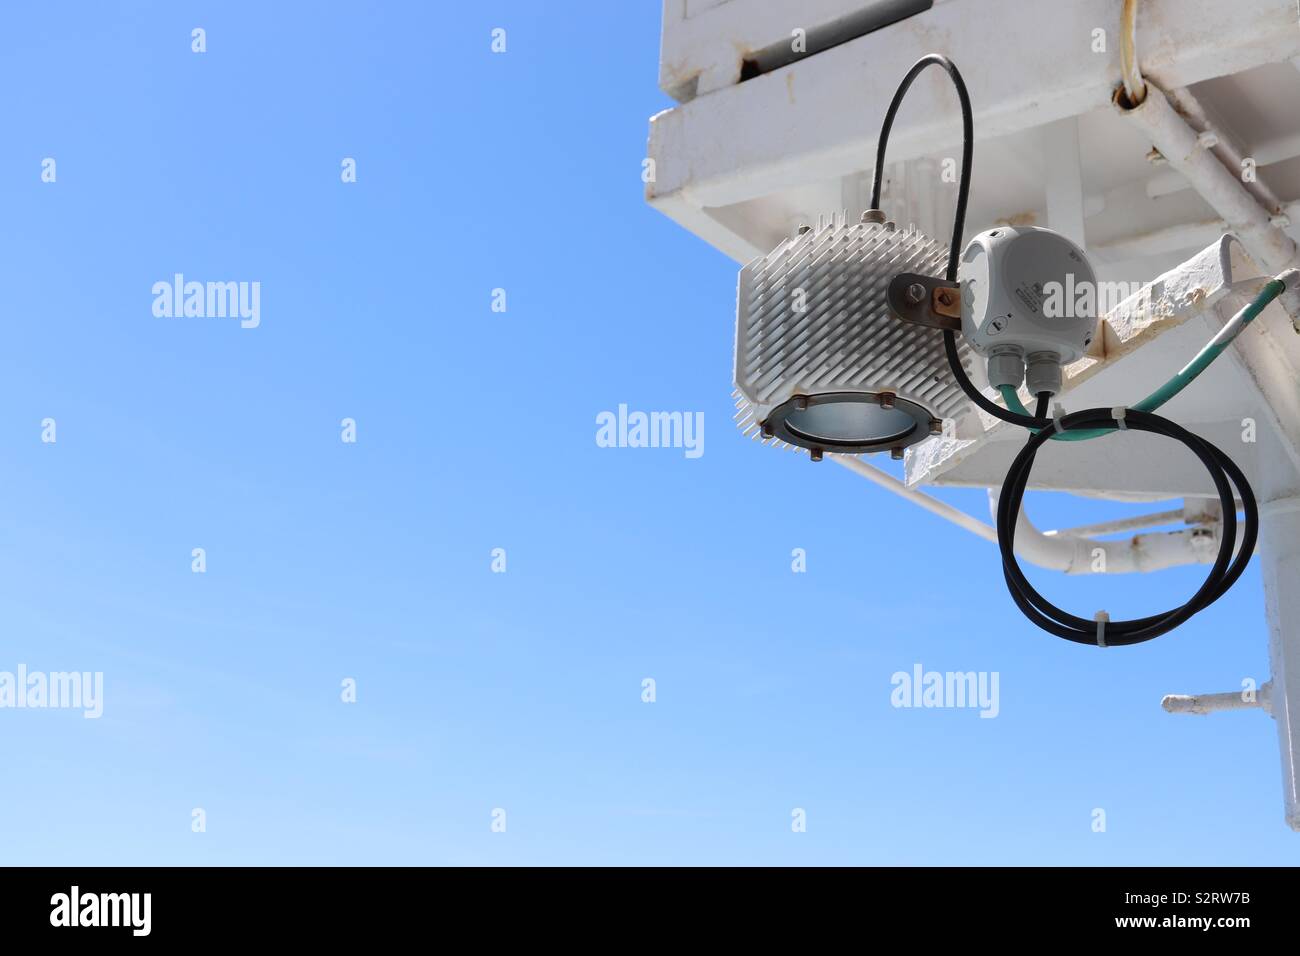 Abstract image of outdoor light on cruise ship Stock Photo